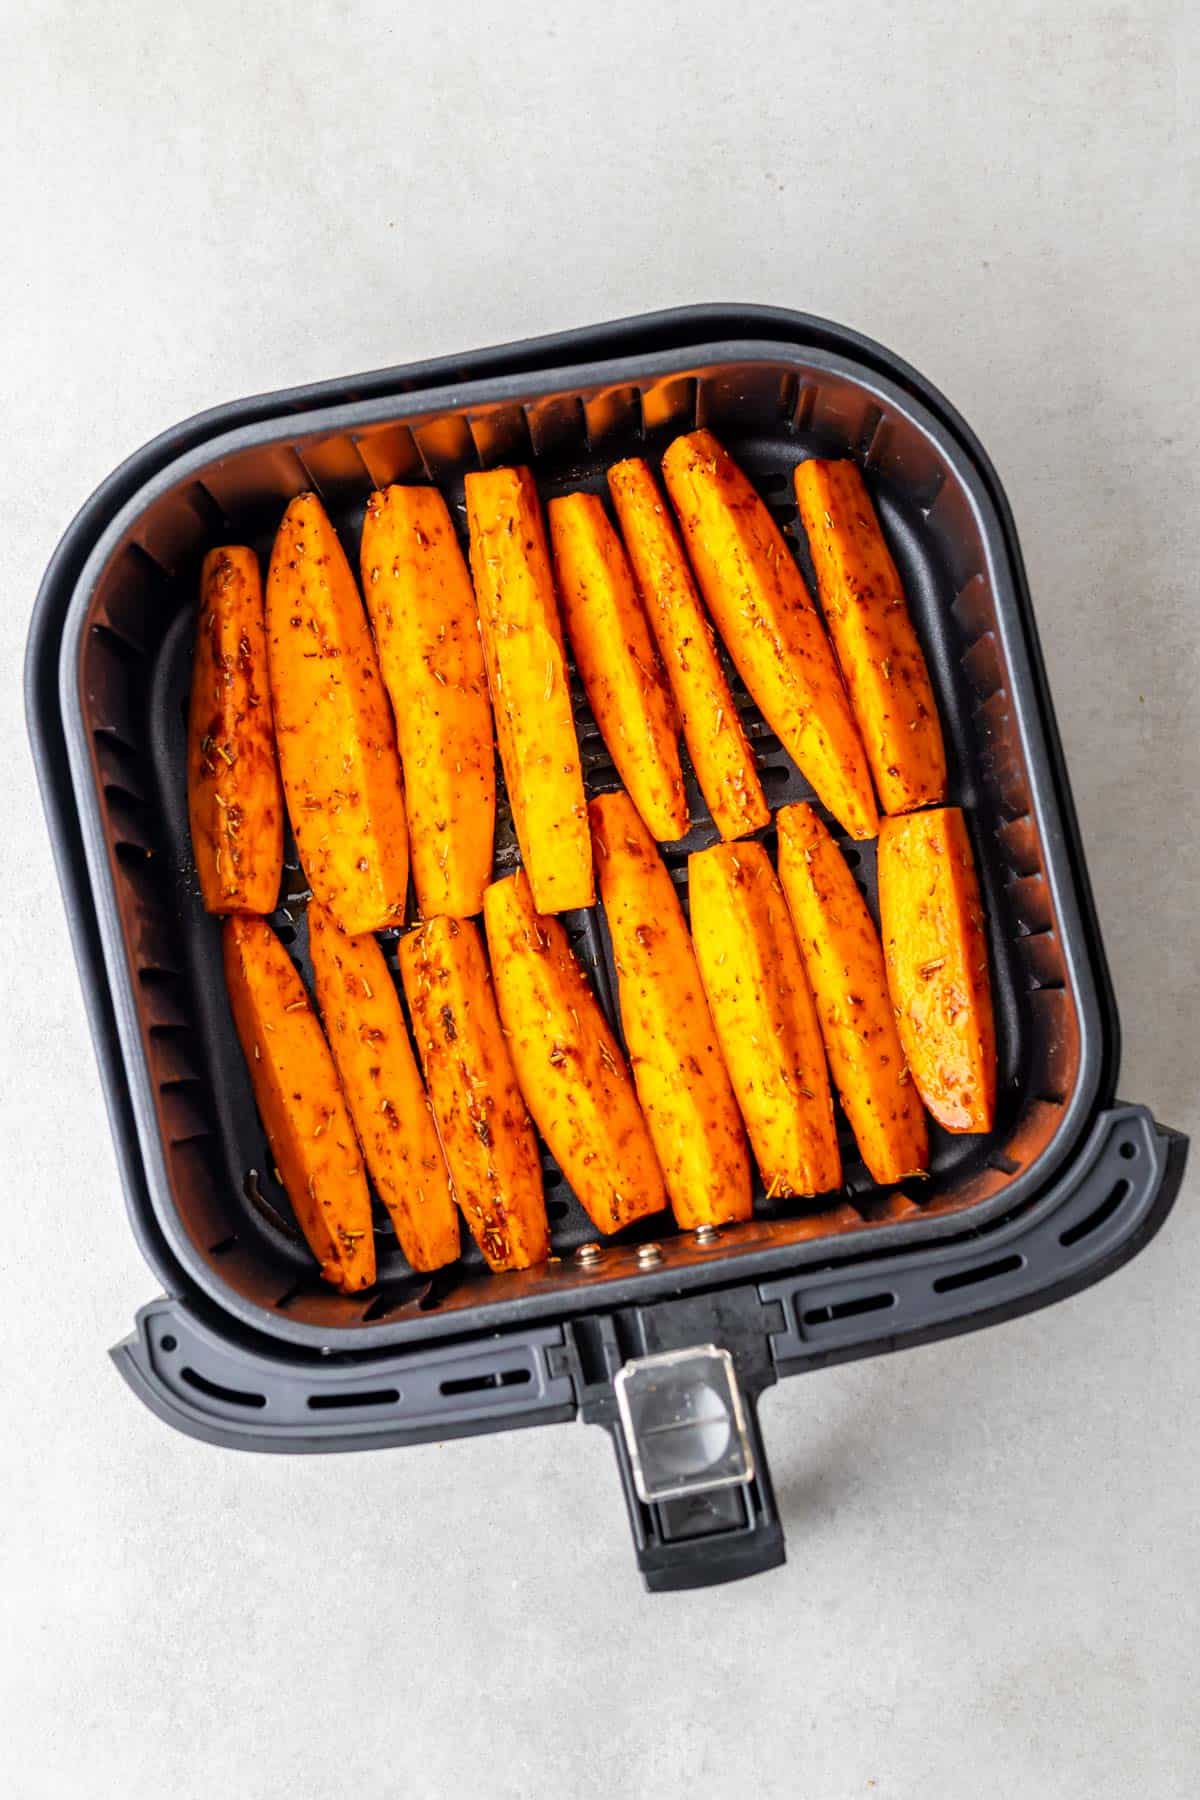 sweet potato wedges in the air fryer ready to be cooked